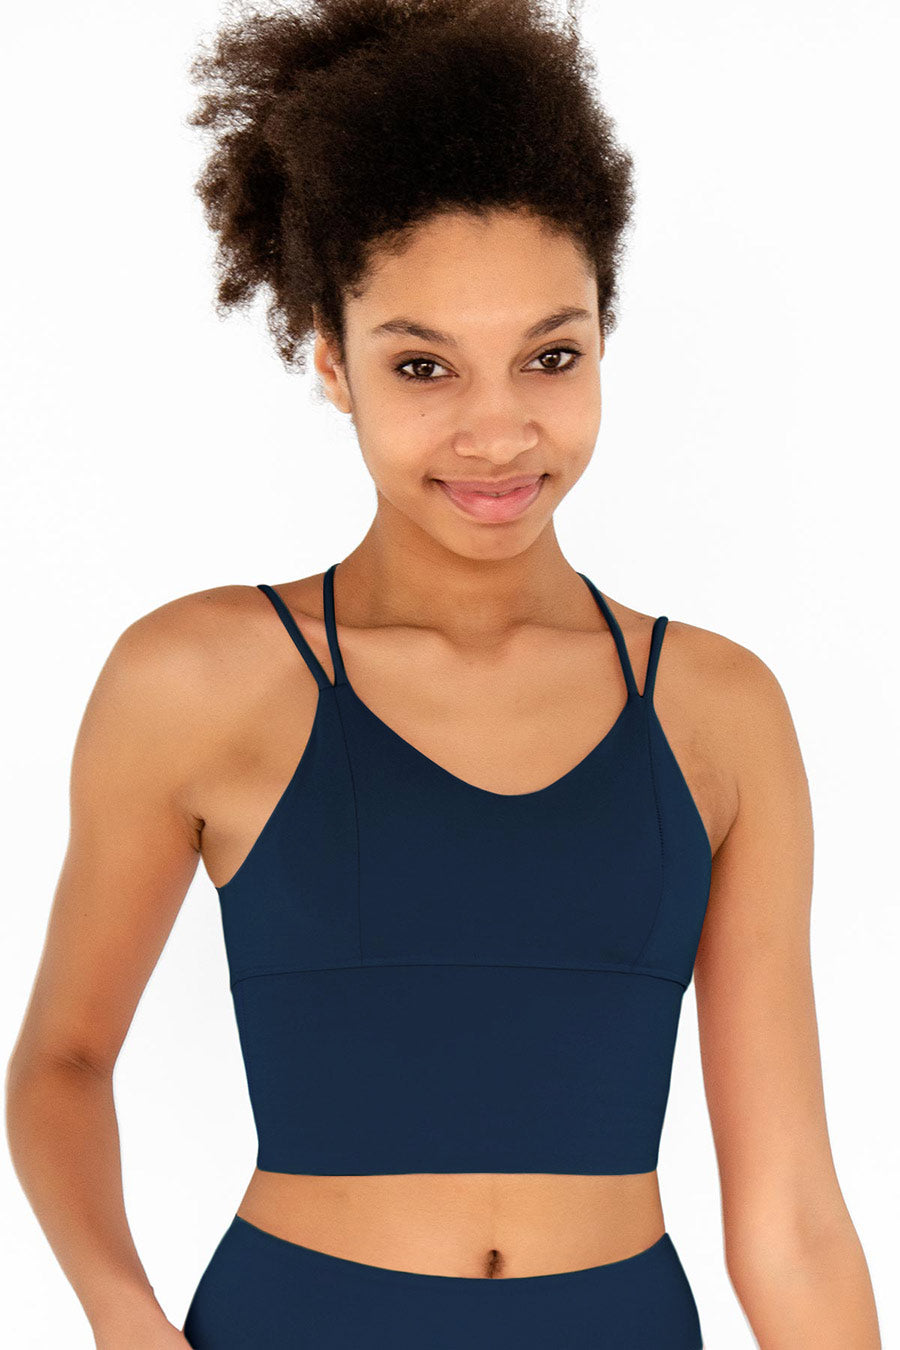 SEMI-ANNUAL SALE! Navy Blue Kelly Strappy Long Line Padded Sports Bra - Women - Pineapple Clothing